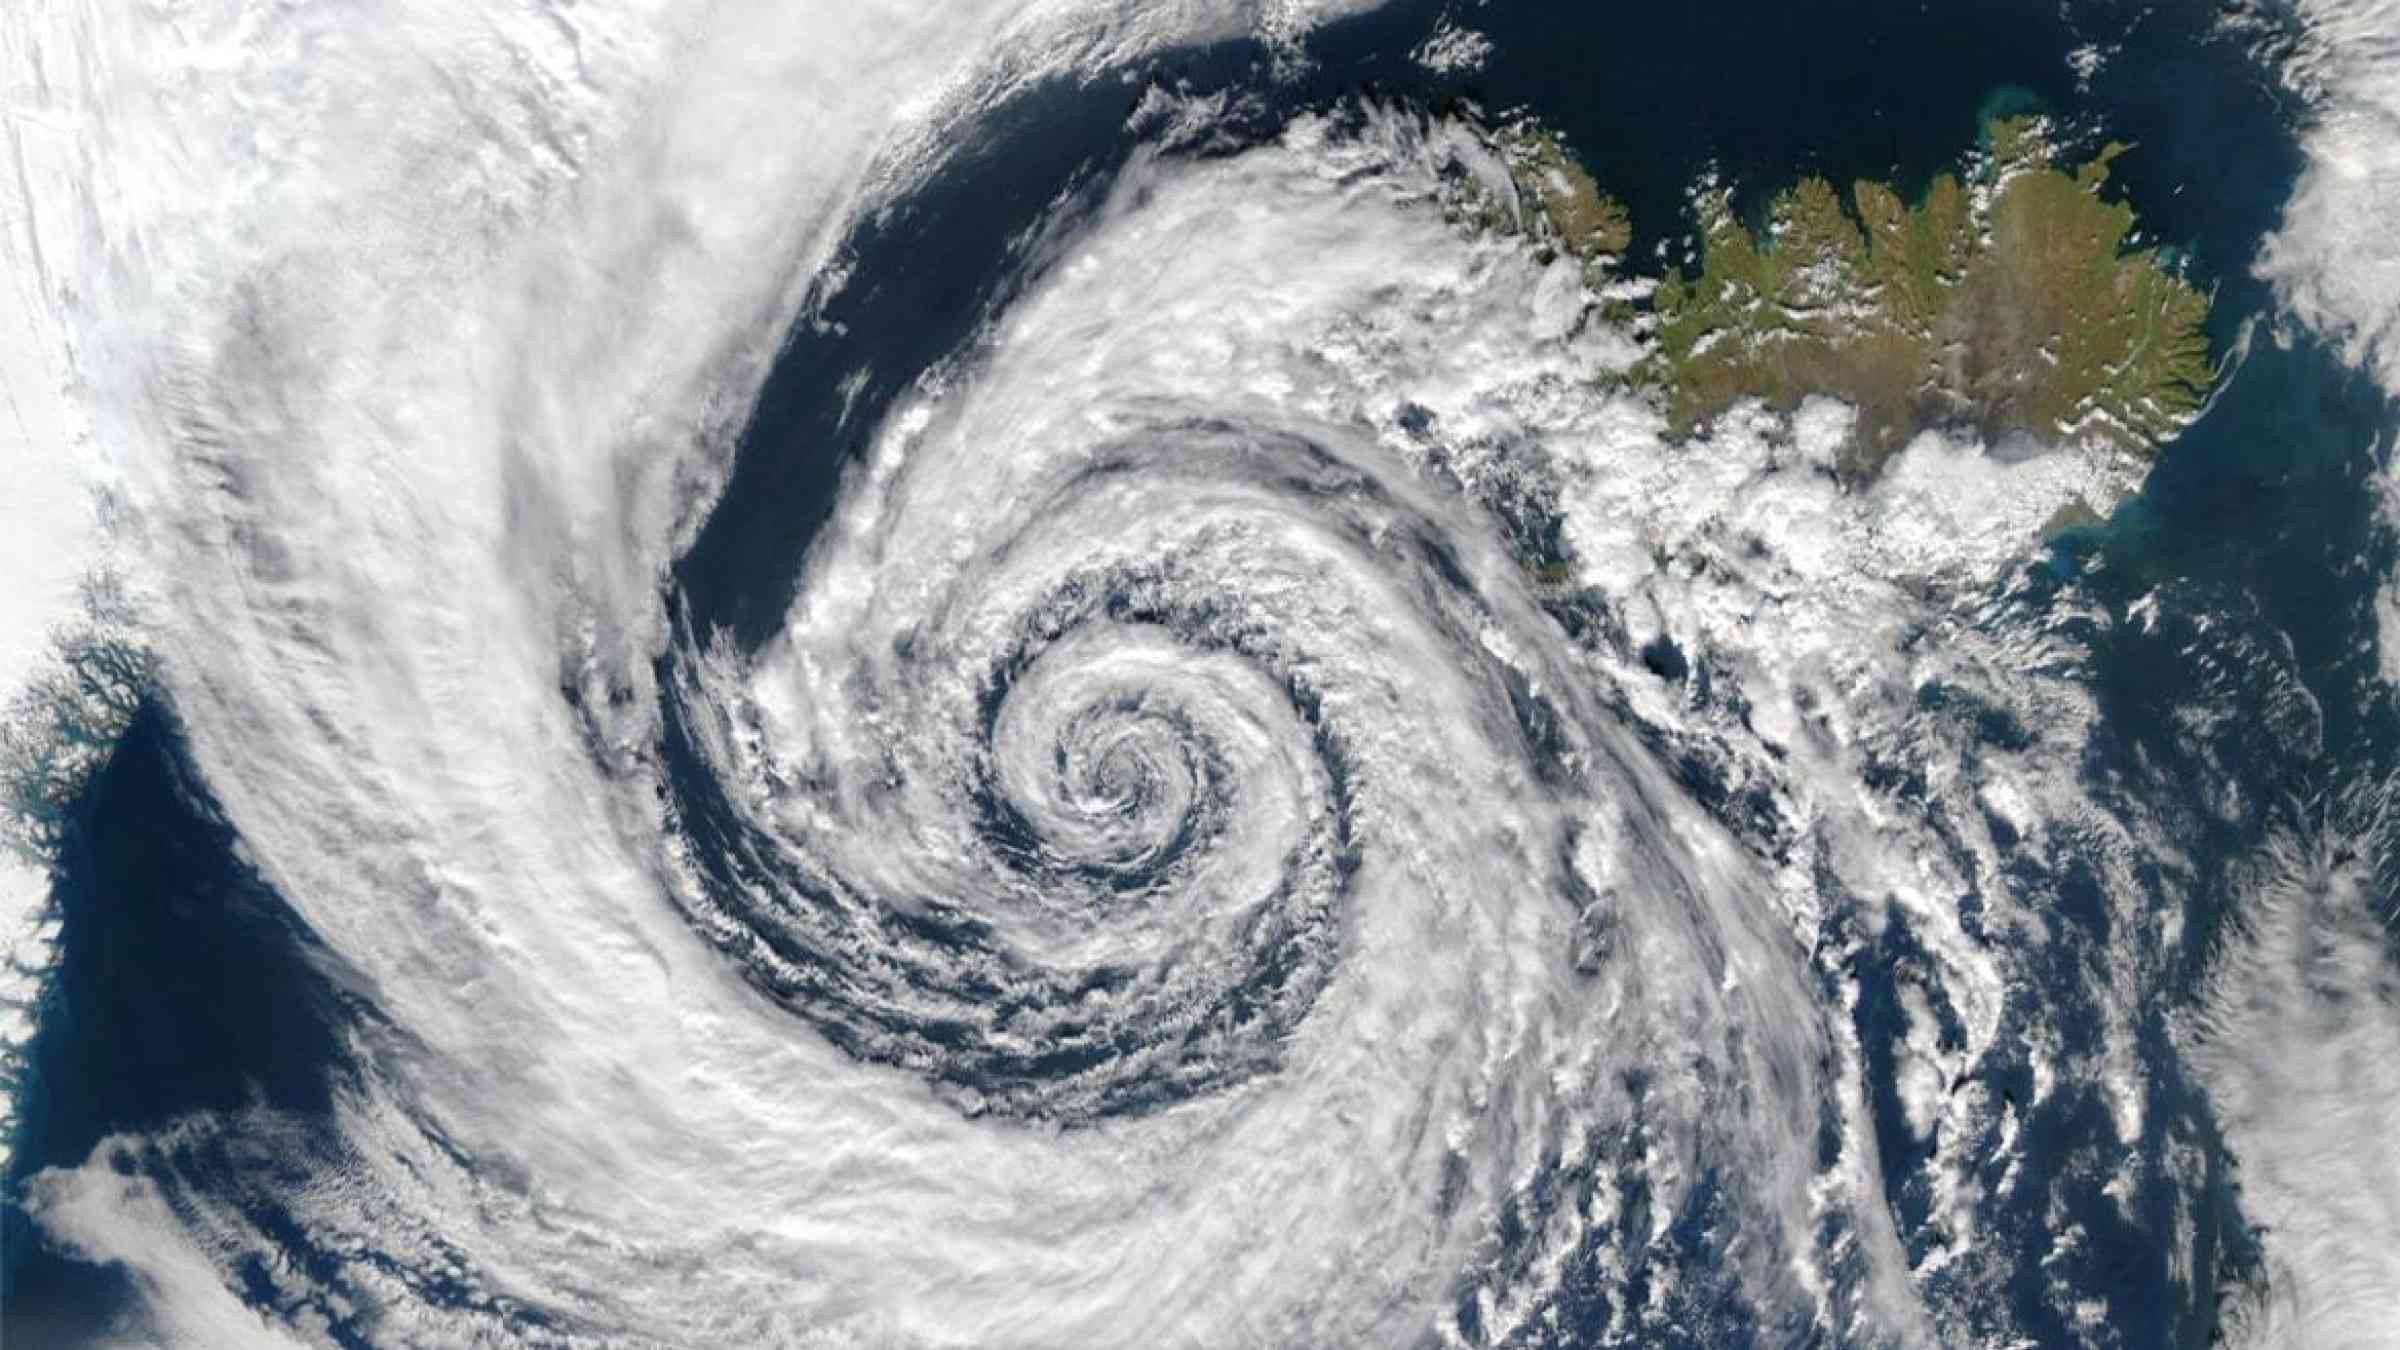 A storm off the coast of Iceland as imaged by a weather satellite